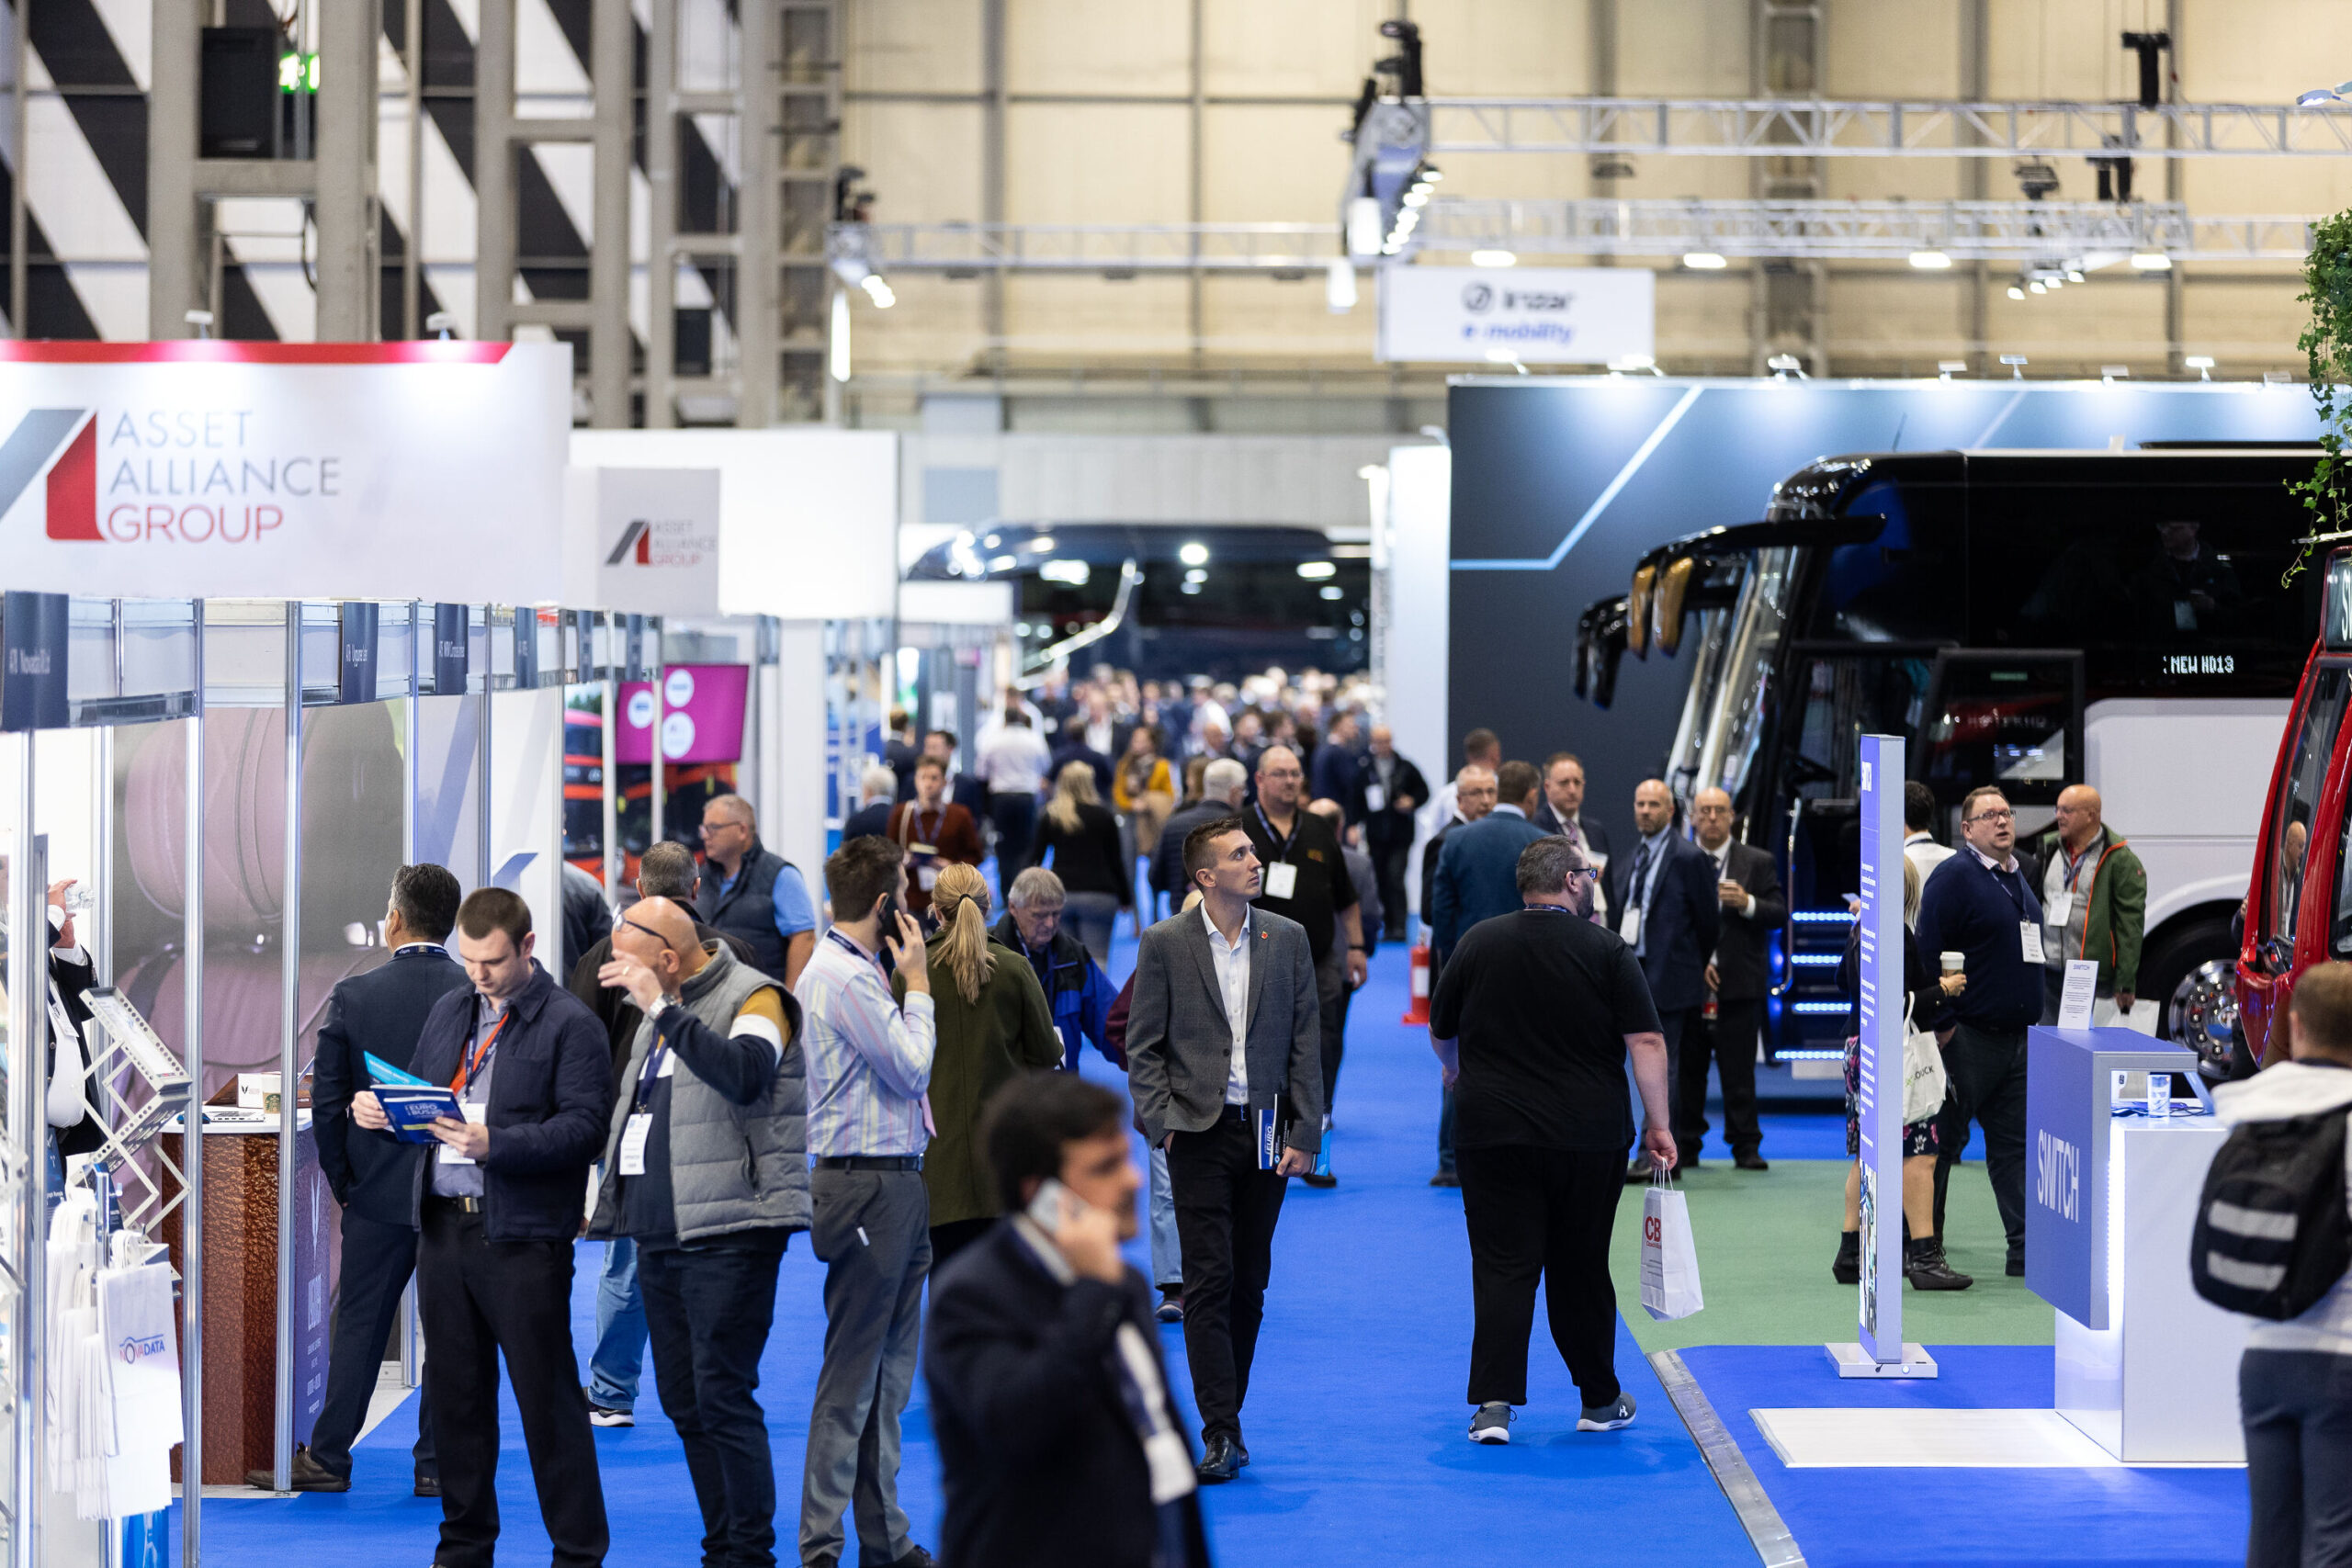 Euro Bus Expo organisers expect strong return